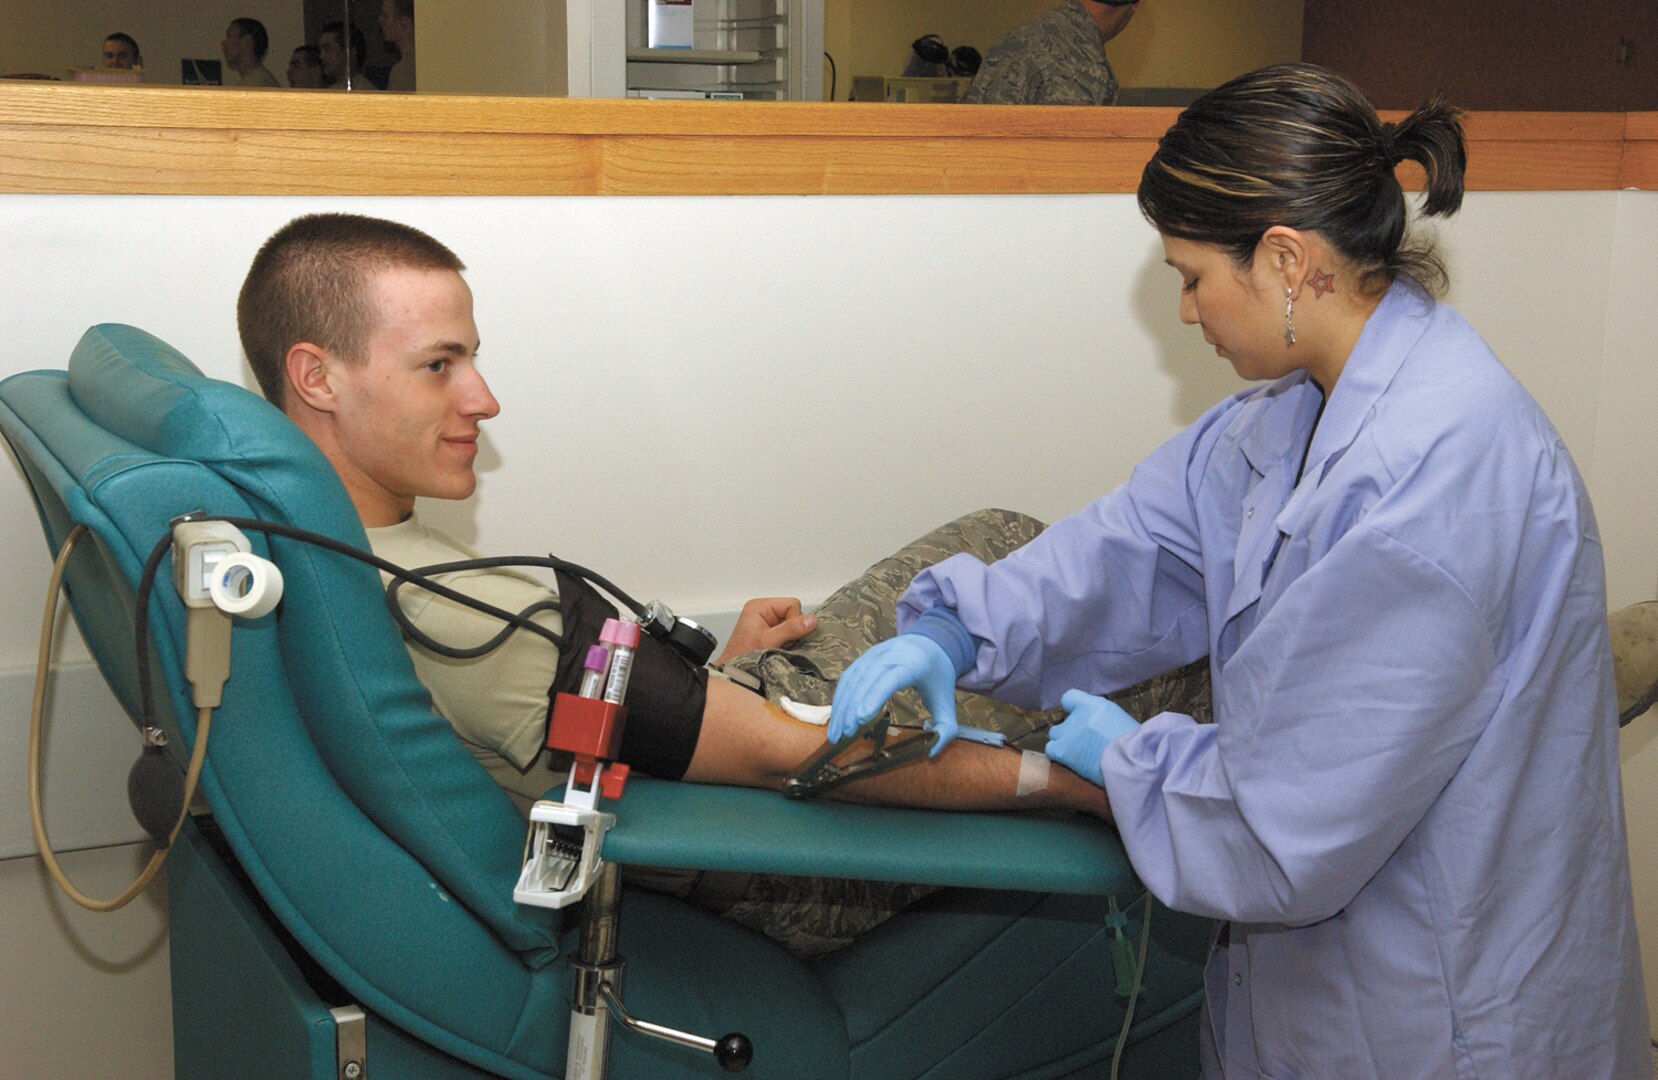 1/13/2009 - Lorraine Castillo, a phlebotomist, takes the blood of Air Force basic military trainee Kyle Conger, 320th Training Squadron, at the Lackland Blood Donor Center Jan. 13. January is National Blood Donor Month. The Lackland Blood Donor Center thanks everyone who has given blood and encourages those who have not to consider becoming regular donors. (USAF photo by Alan Boedeker)                        